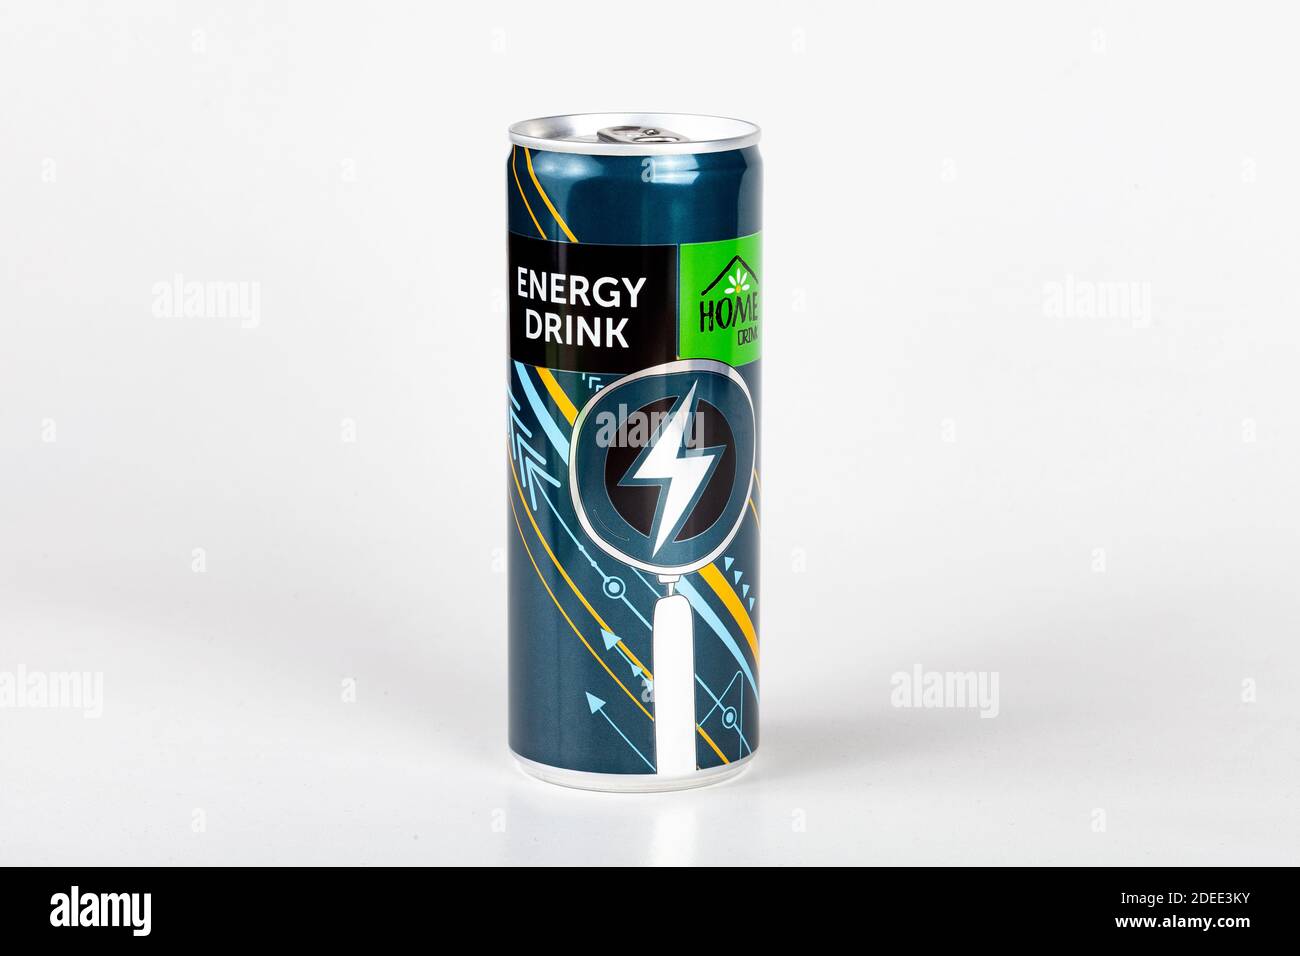 Home Drink energy drink can, 250 ml. Simple carbonated caffeinated sugary drink produced by Stokrotka, a Polish reatil company, studio shot Stock Photo